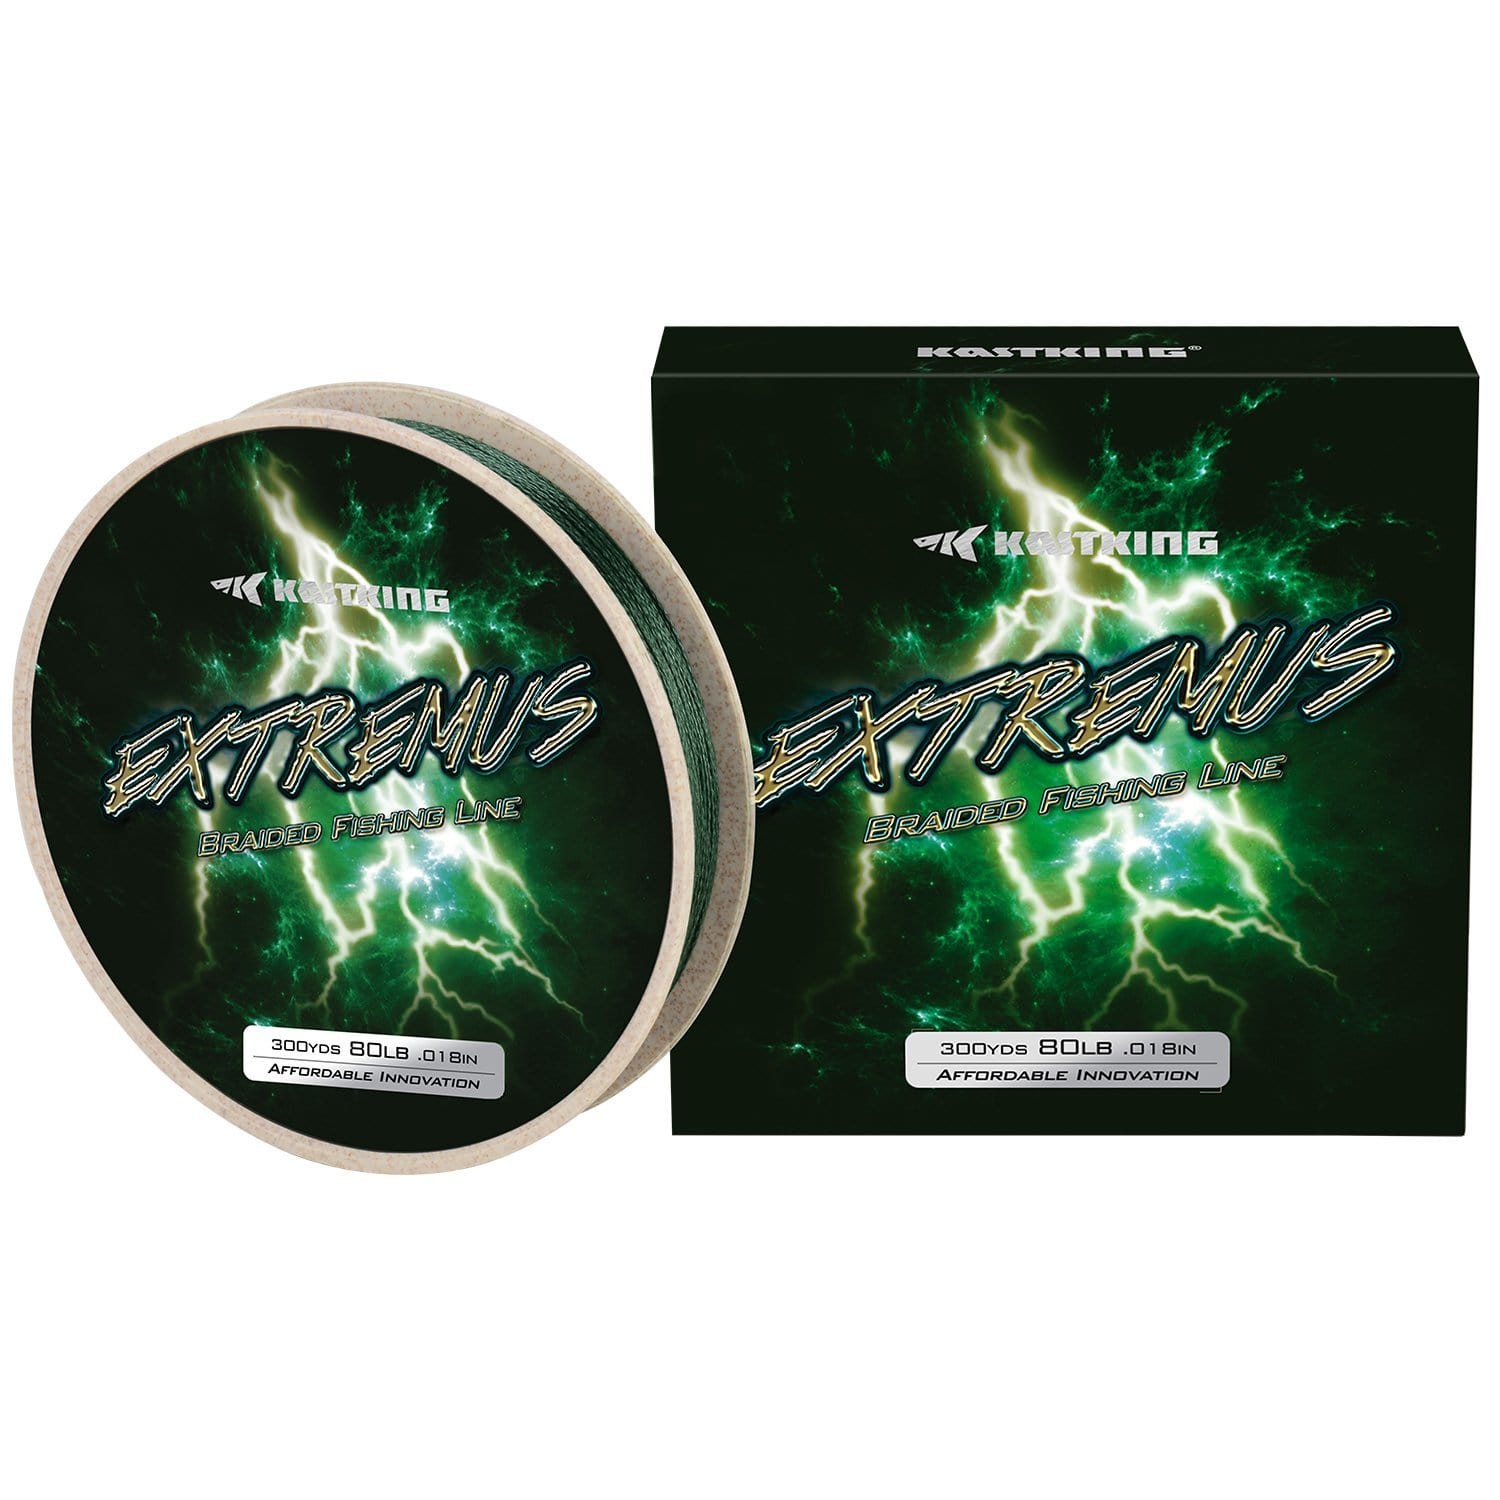 Spiderwire EZ Fishing Line (Braid/Fluorocarbon/Monofilament) 300 Yards Moss  Green 10 Pounds